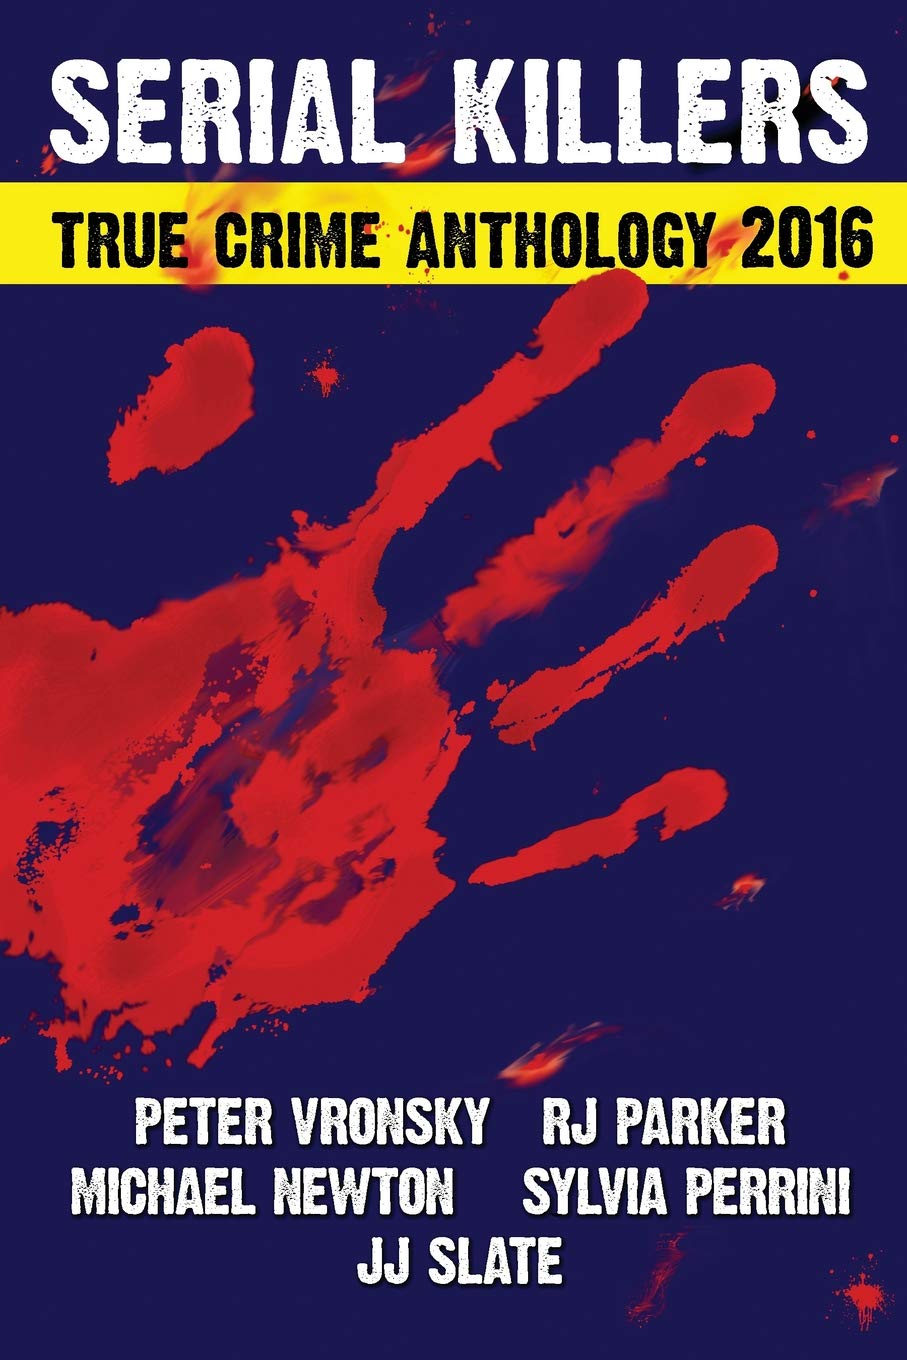 Book Cover 2016 Serial Killers True Crime Anthology